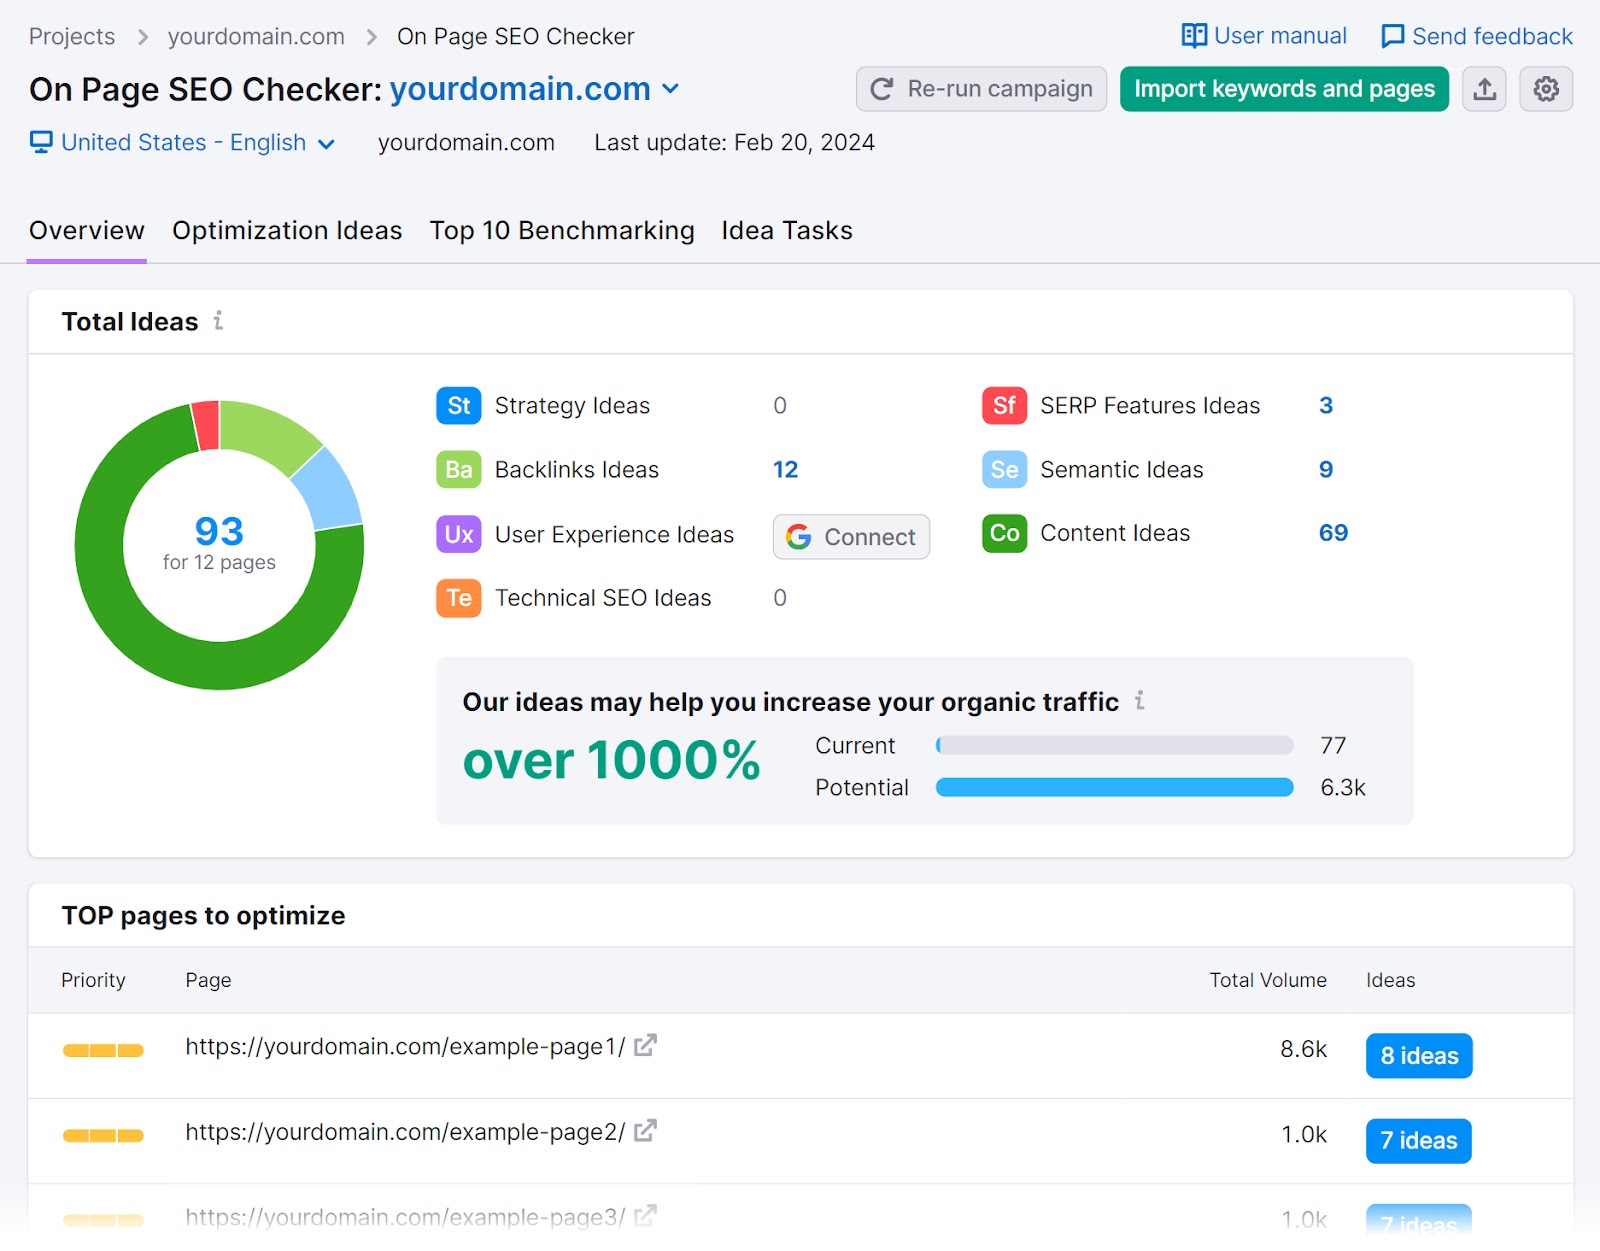 On Page SEO Checker dashboard showing the “Overview” tab.